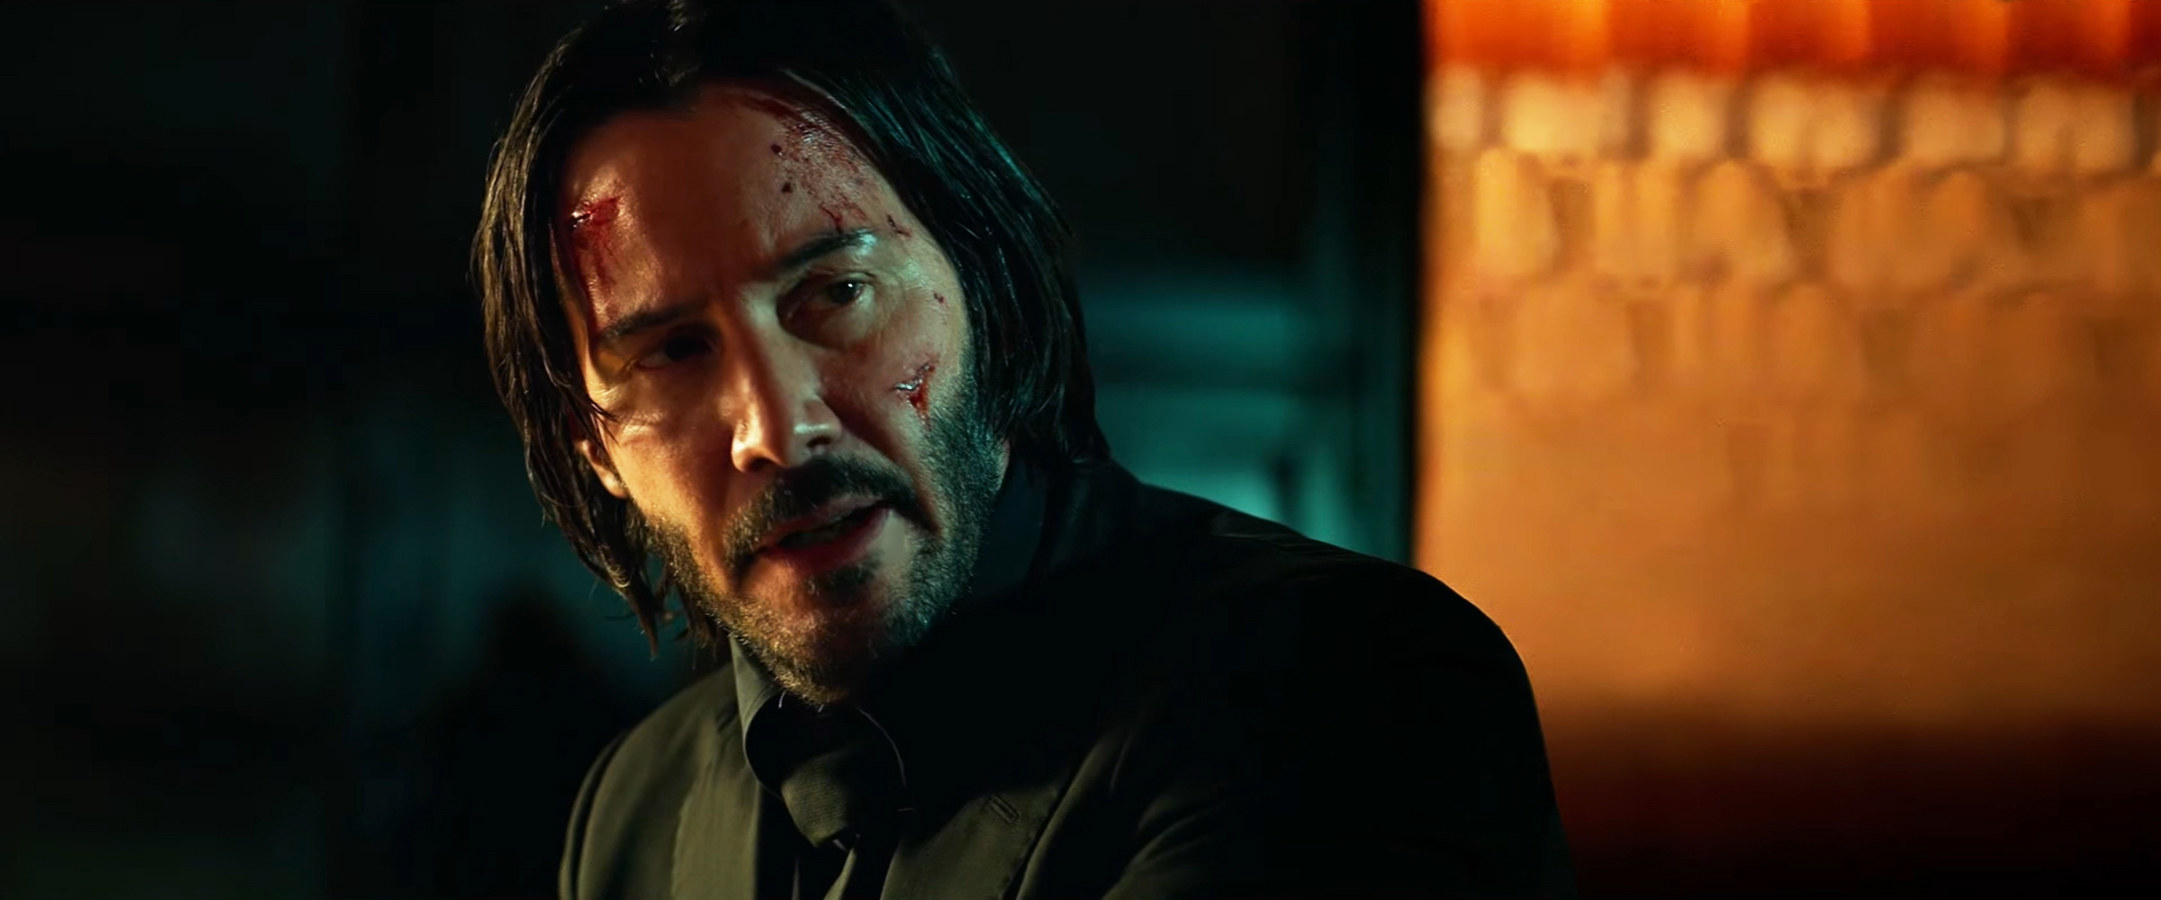 Keanu Reeves in &quot;John Wick: Chapter 2&quot;